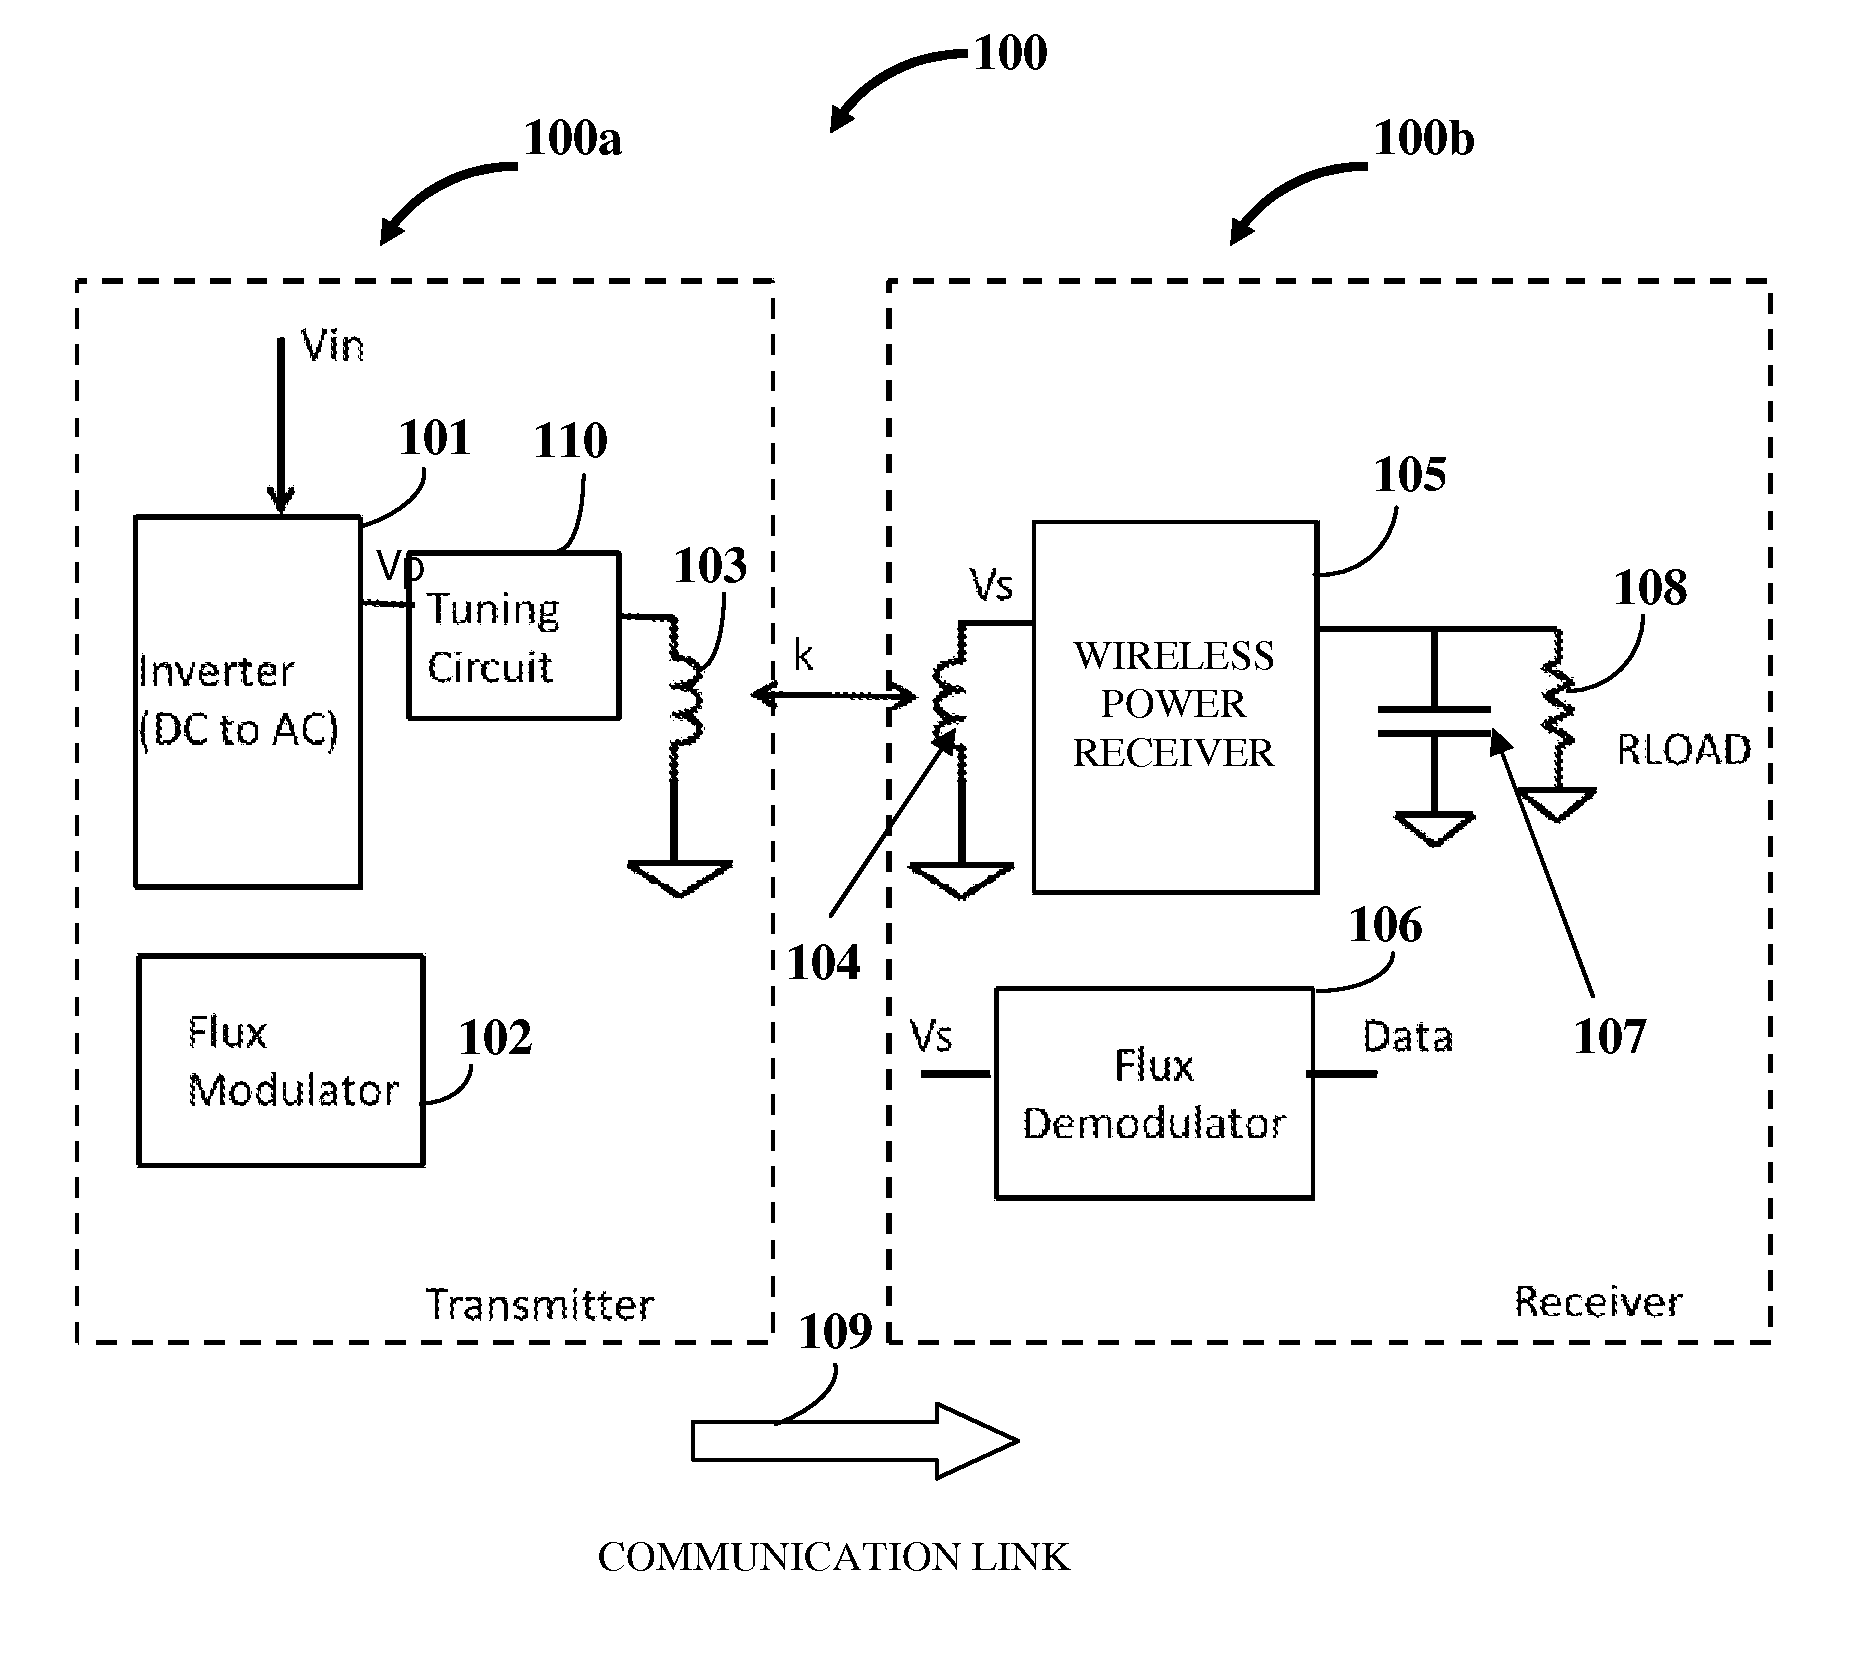 Transmitter To Receiver Communication Link In A Wireless Power System